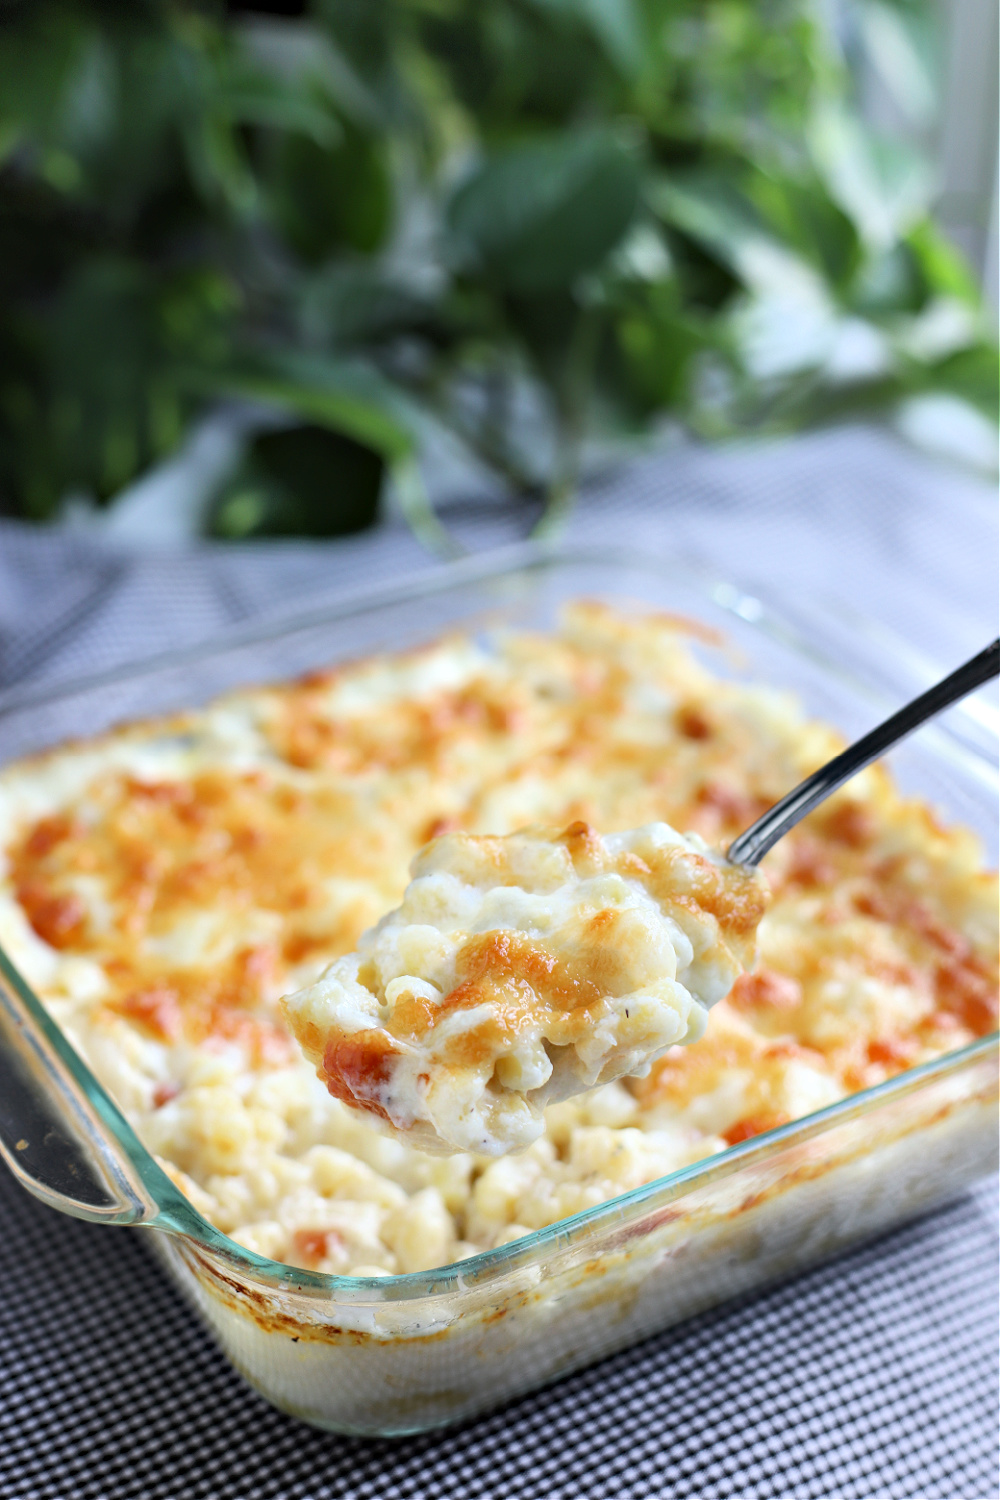 Cheesy homemade baked macaroni and cheese casserole